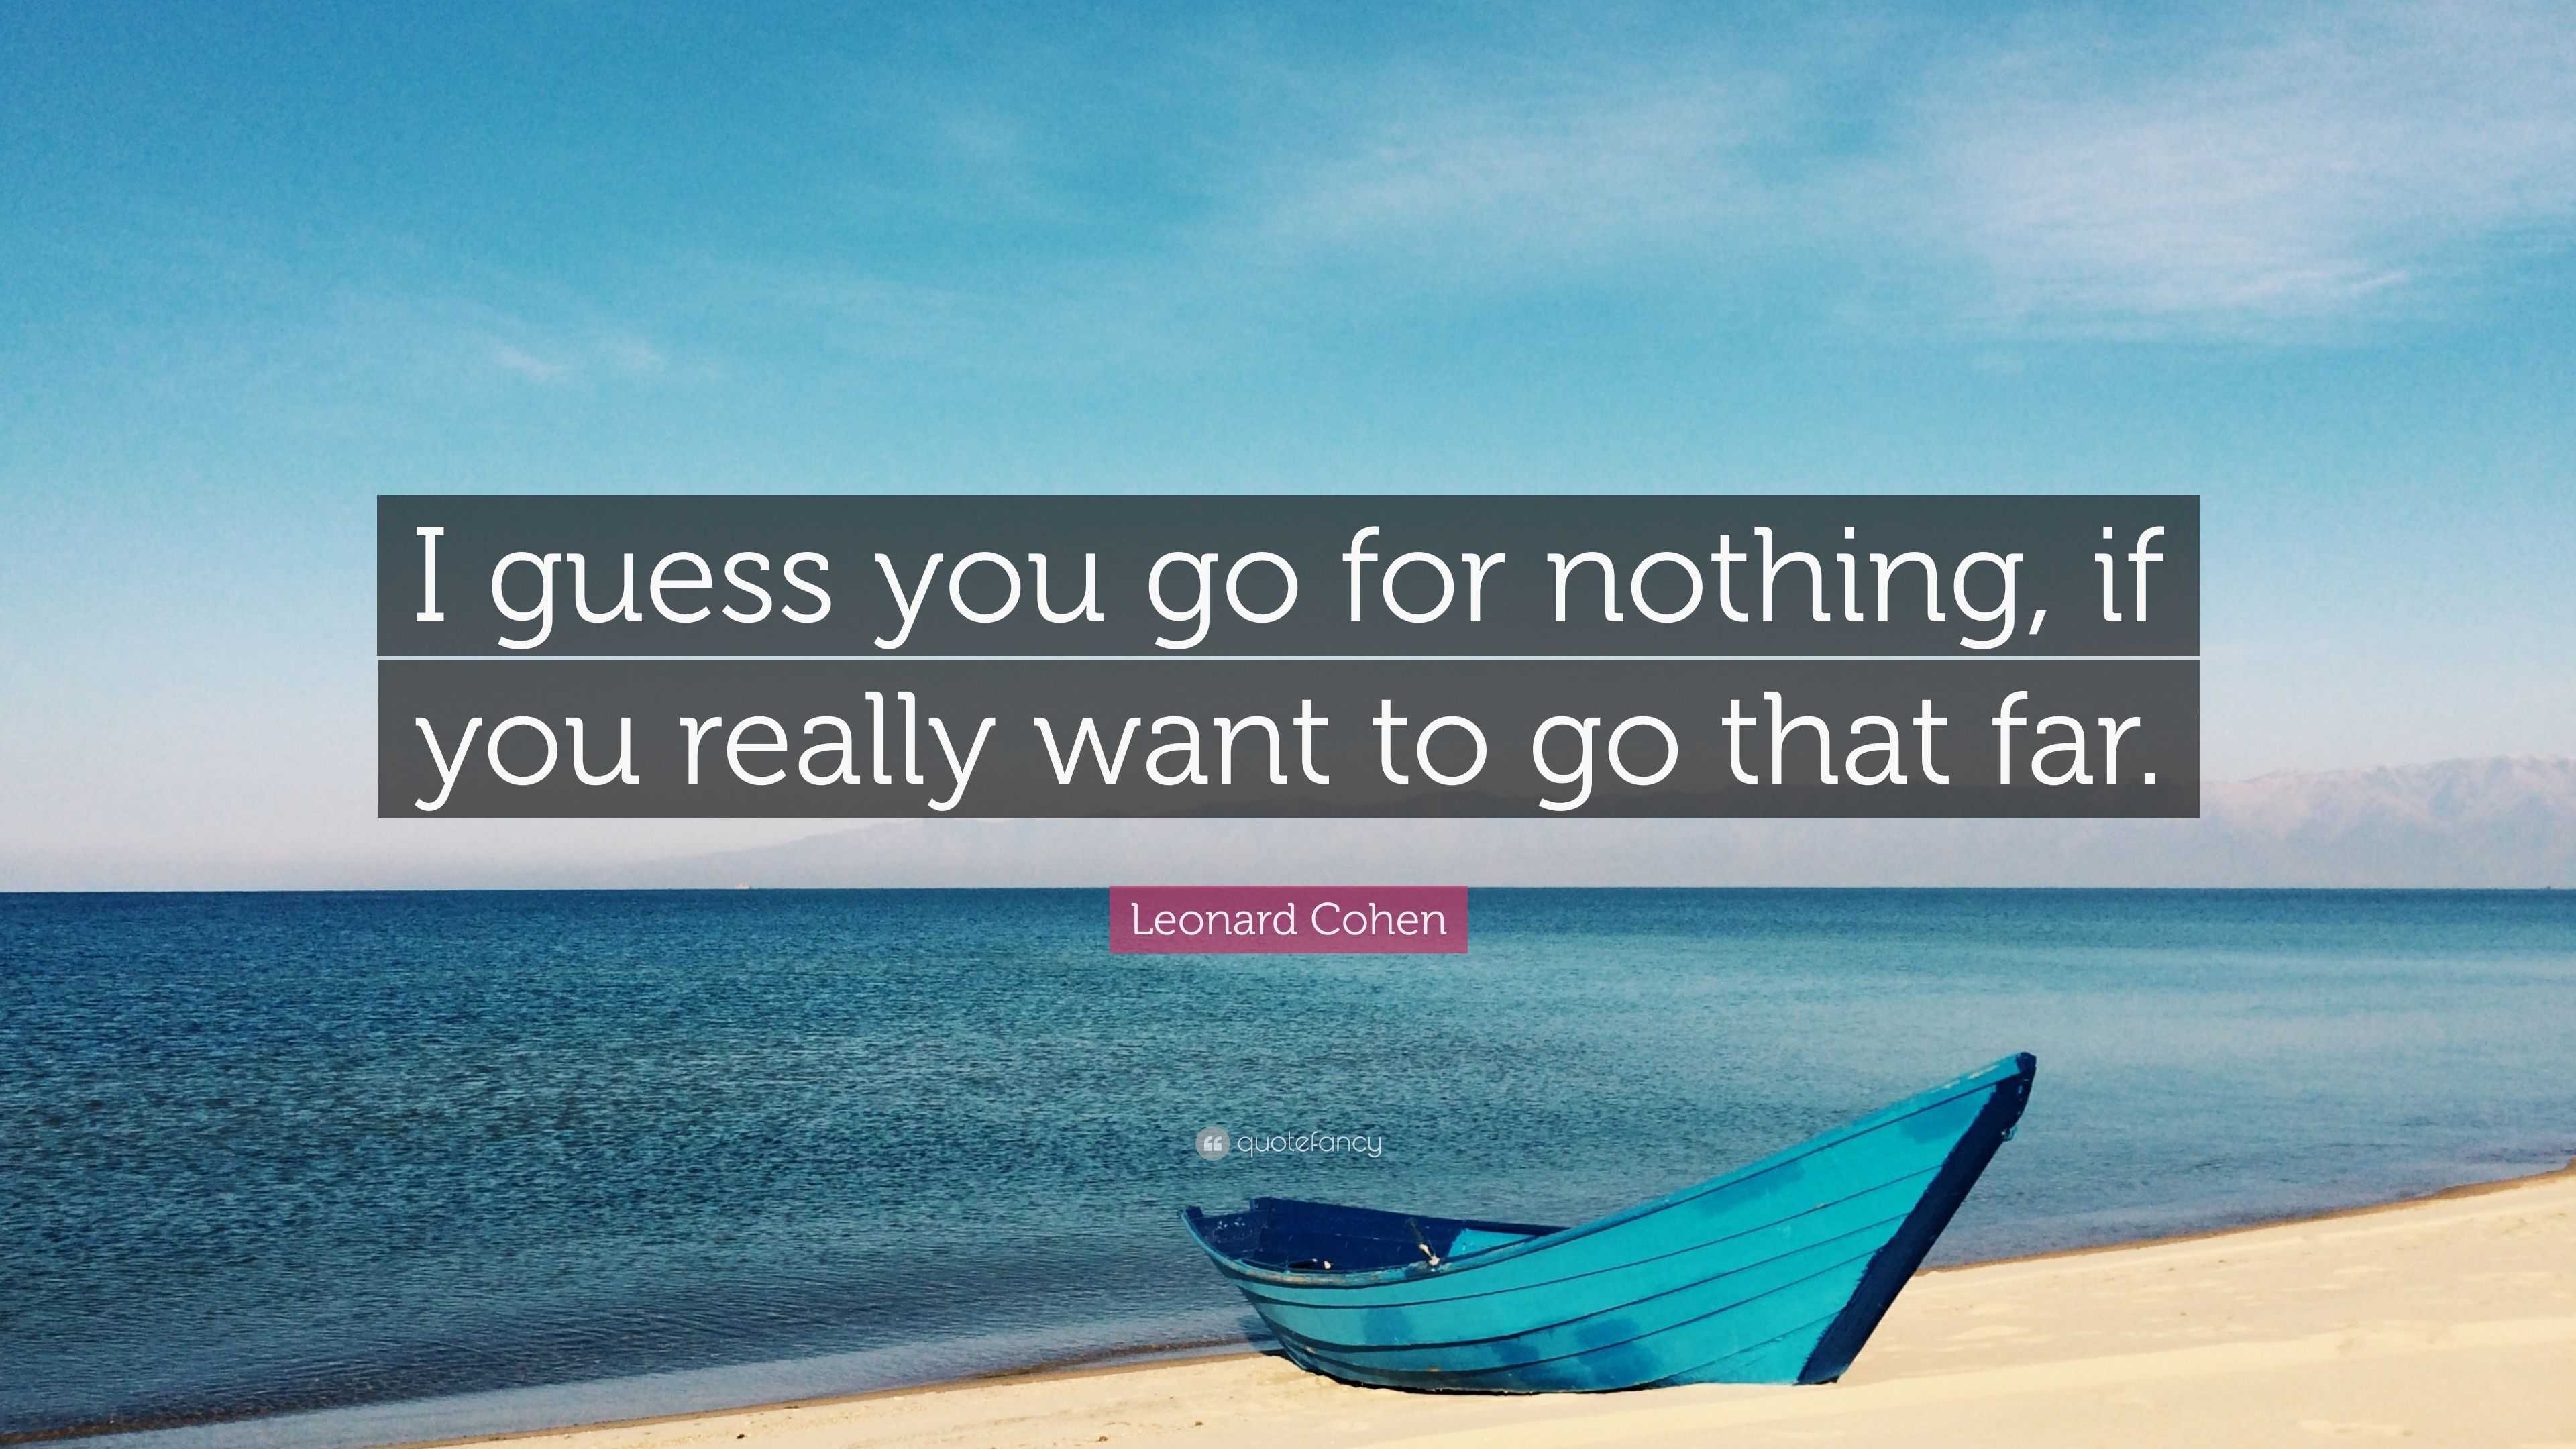 Leonard Cohen Quote: “I guess go for nothing, if you to go that